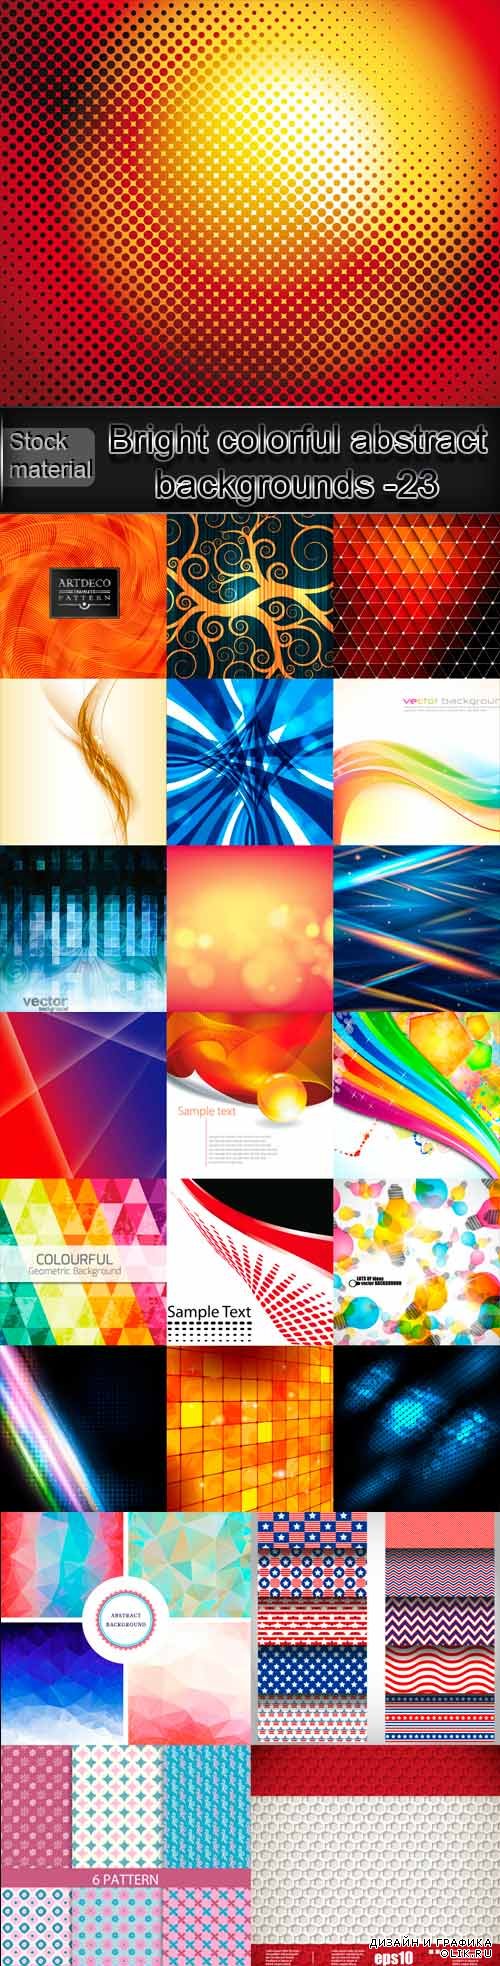 Bright colorful abstract backgrounds vector -23